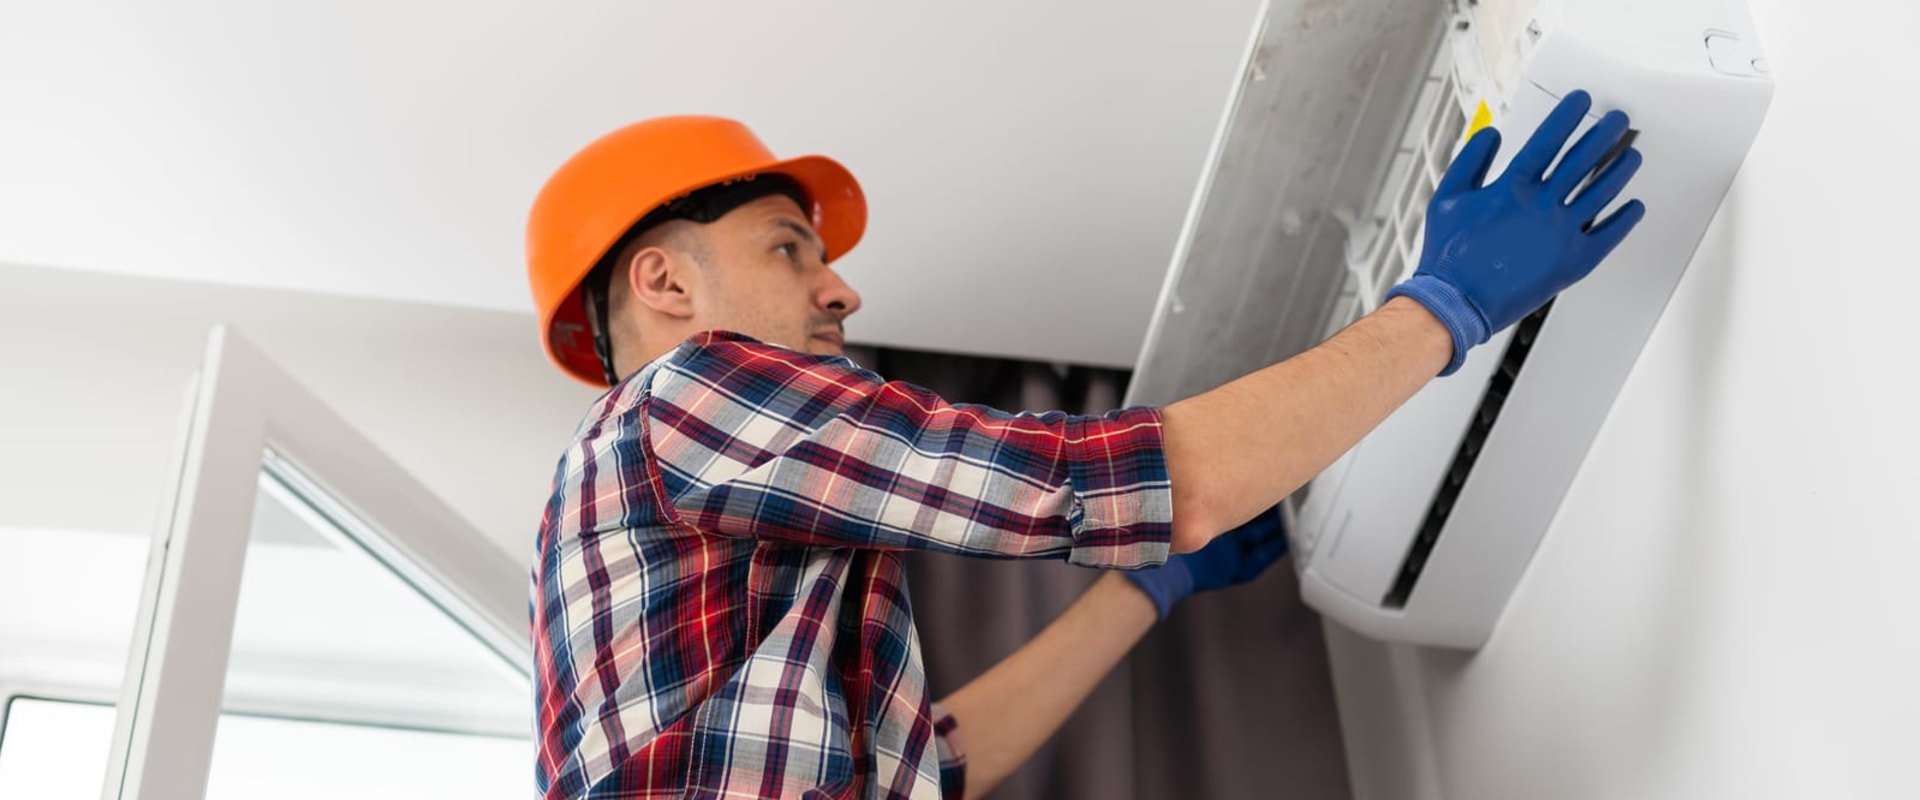 Benefits Of Hiring An AC Contractor In Haughton To Install The AC Unit In Your Deck Construction Project